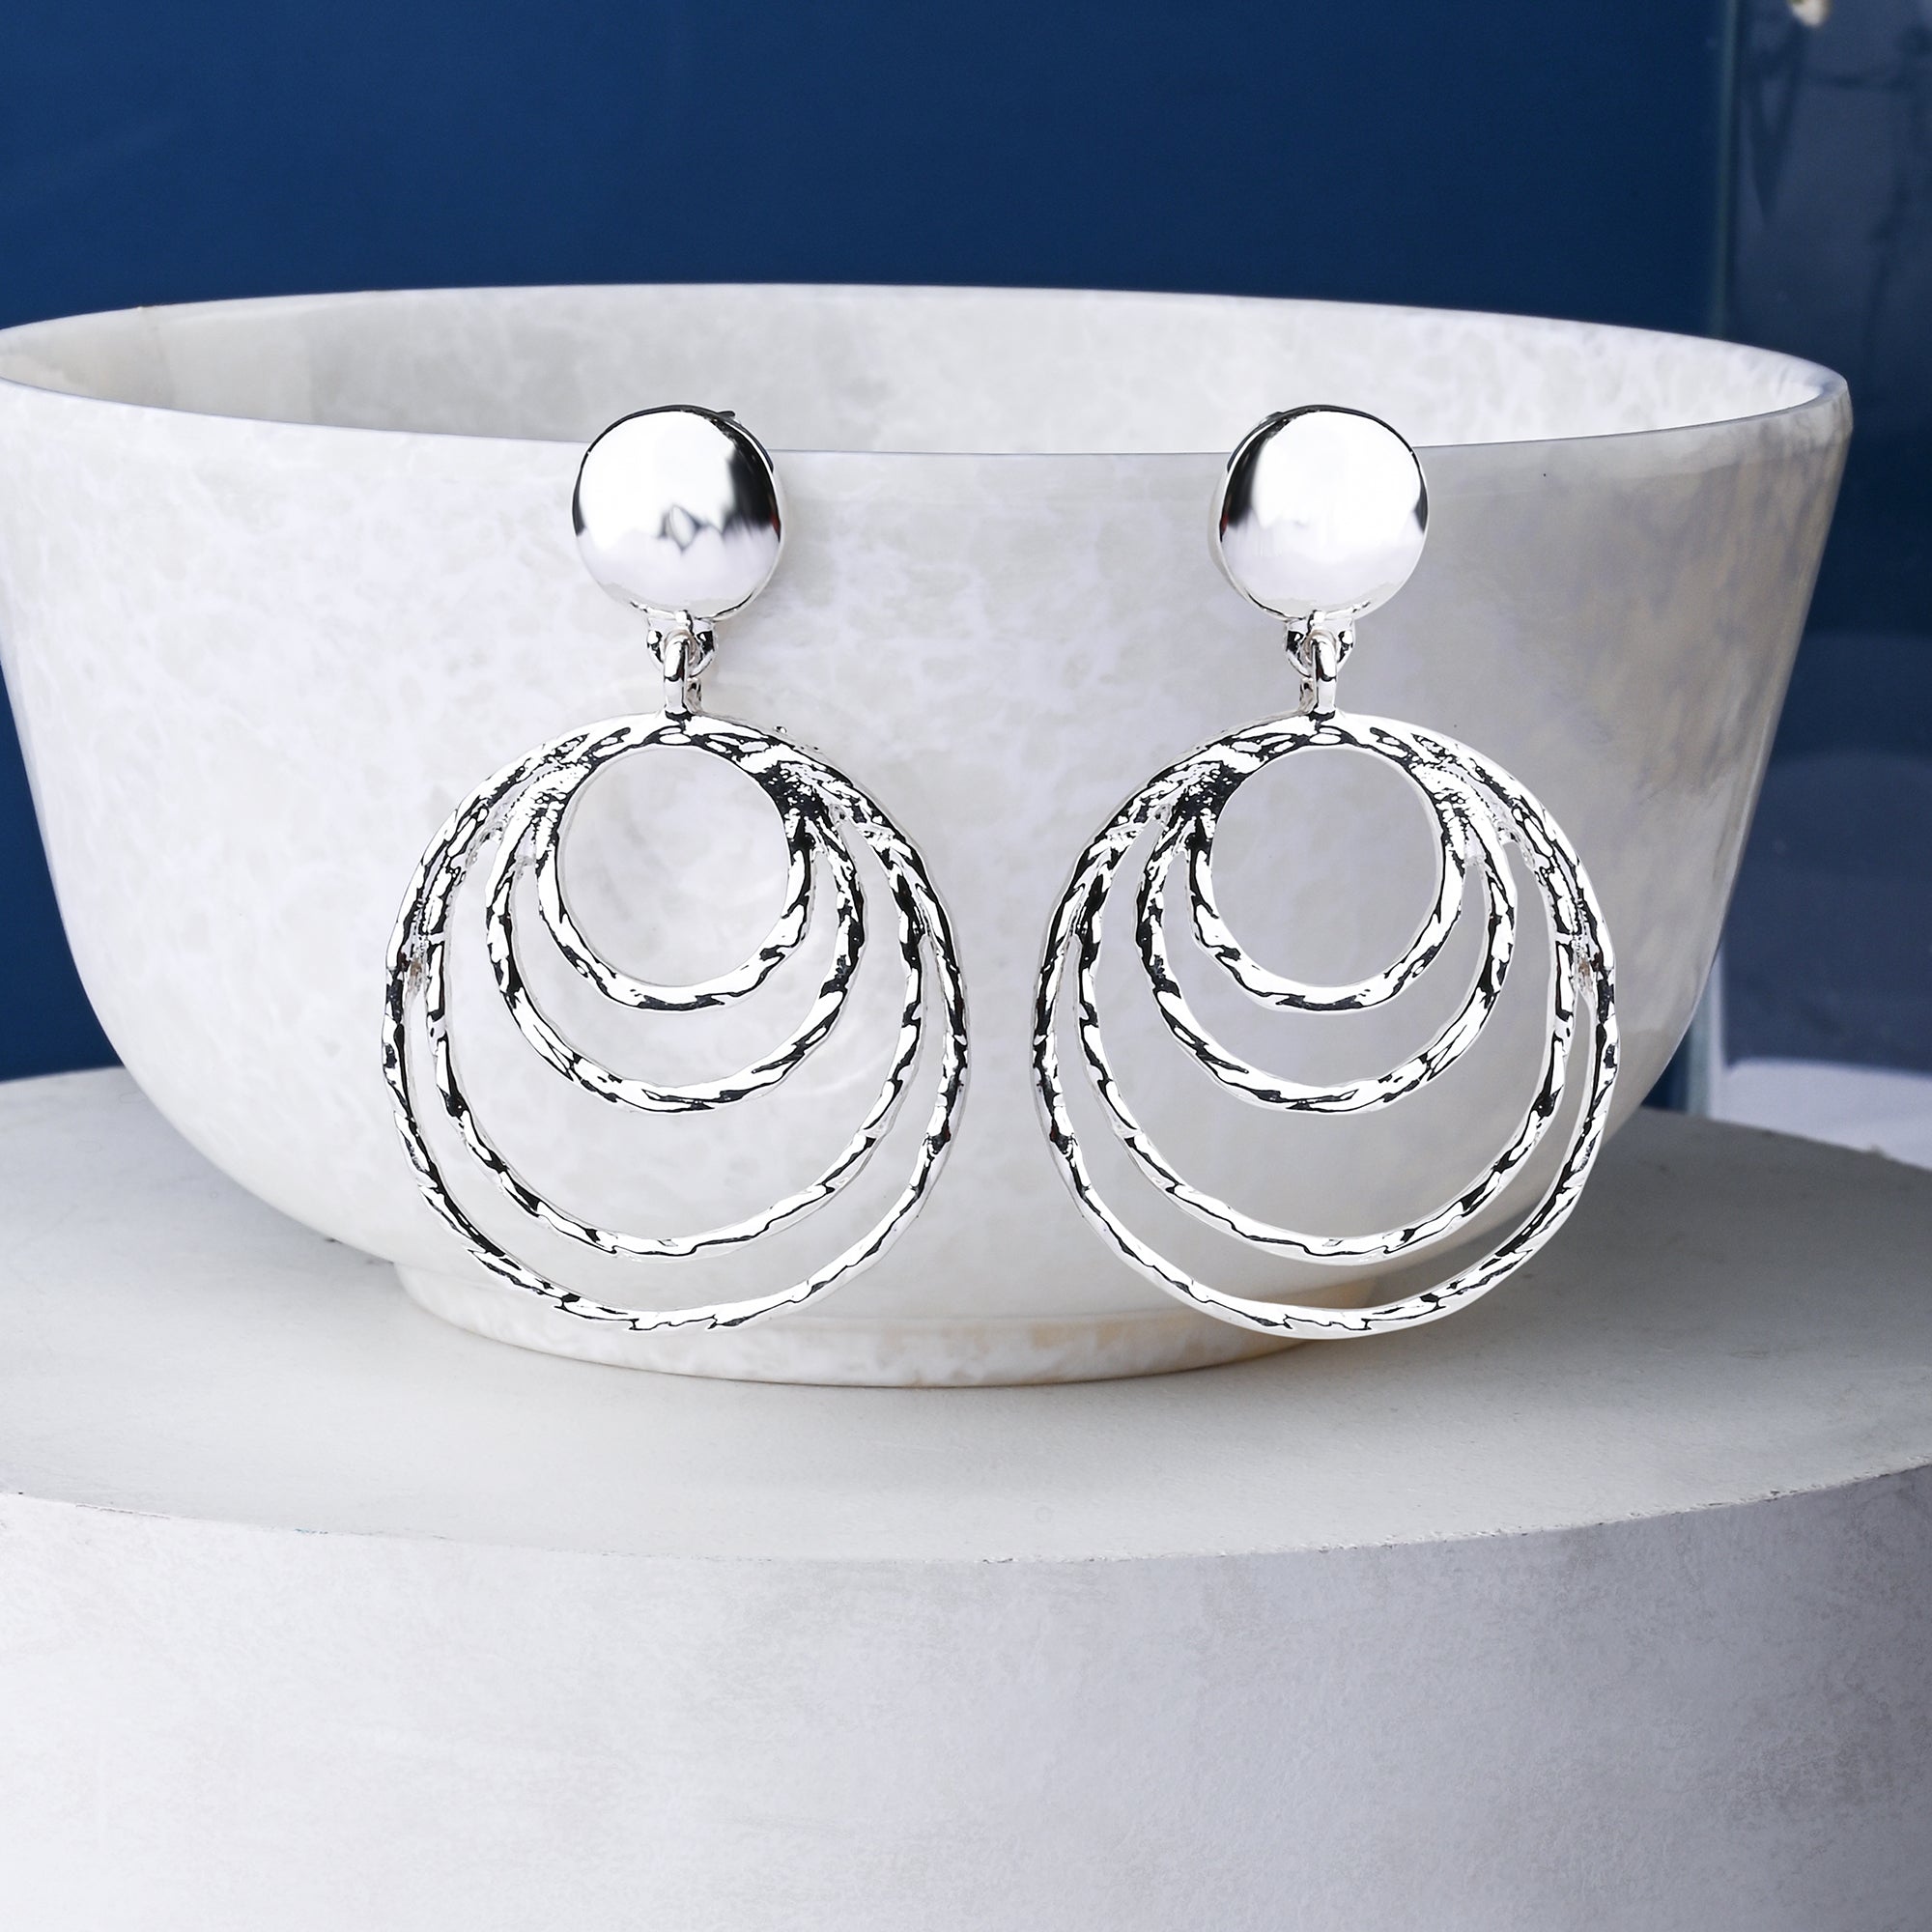 Accessorize London Women's Silver Textured Circles Statement Earring